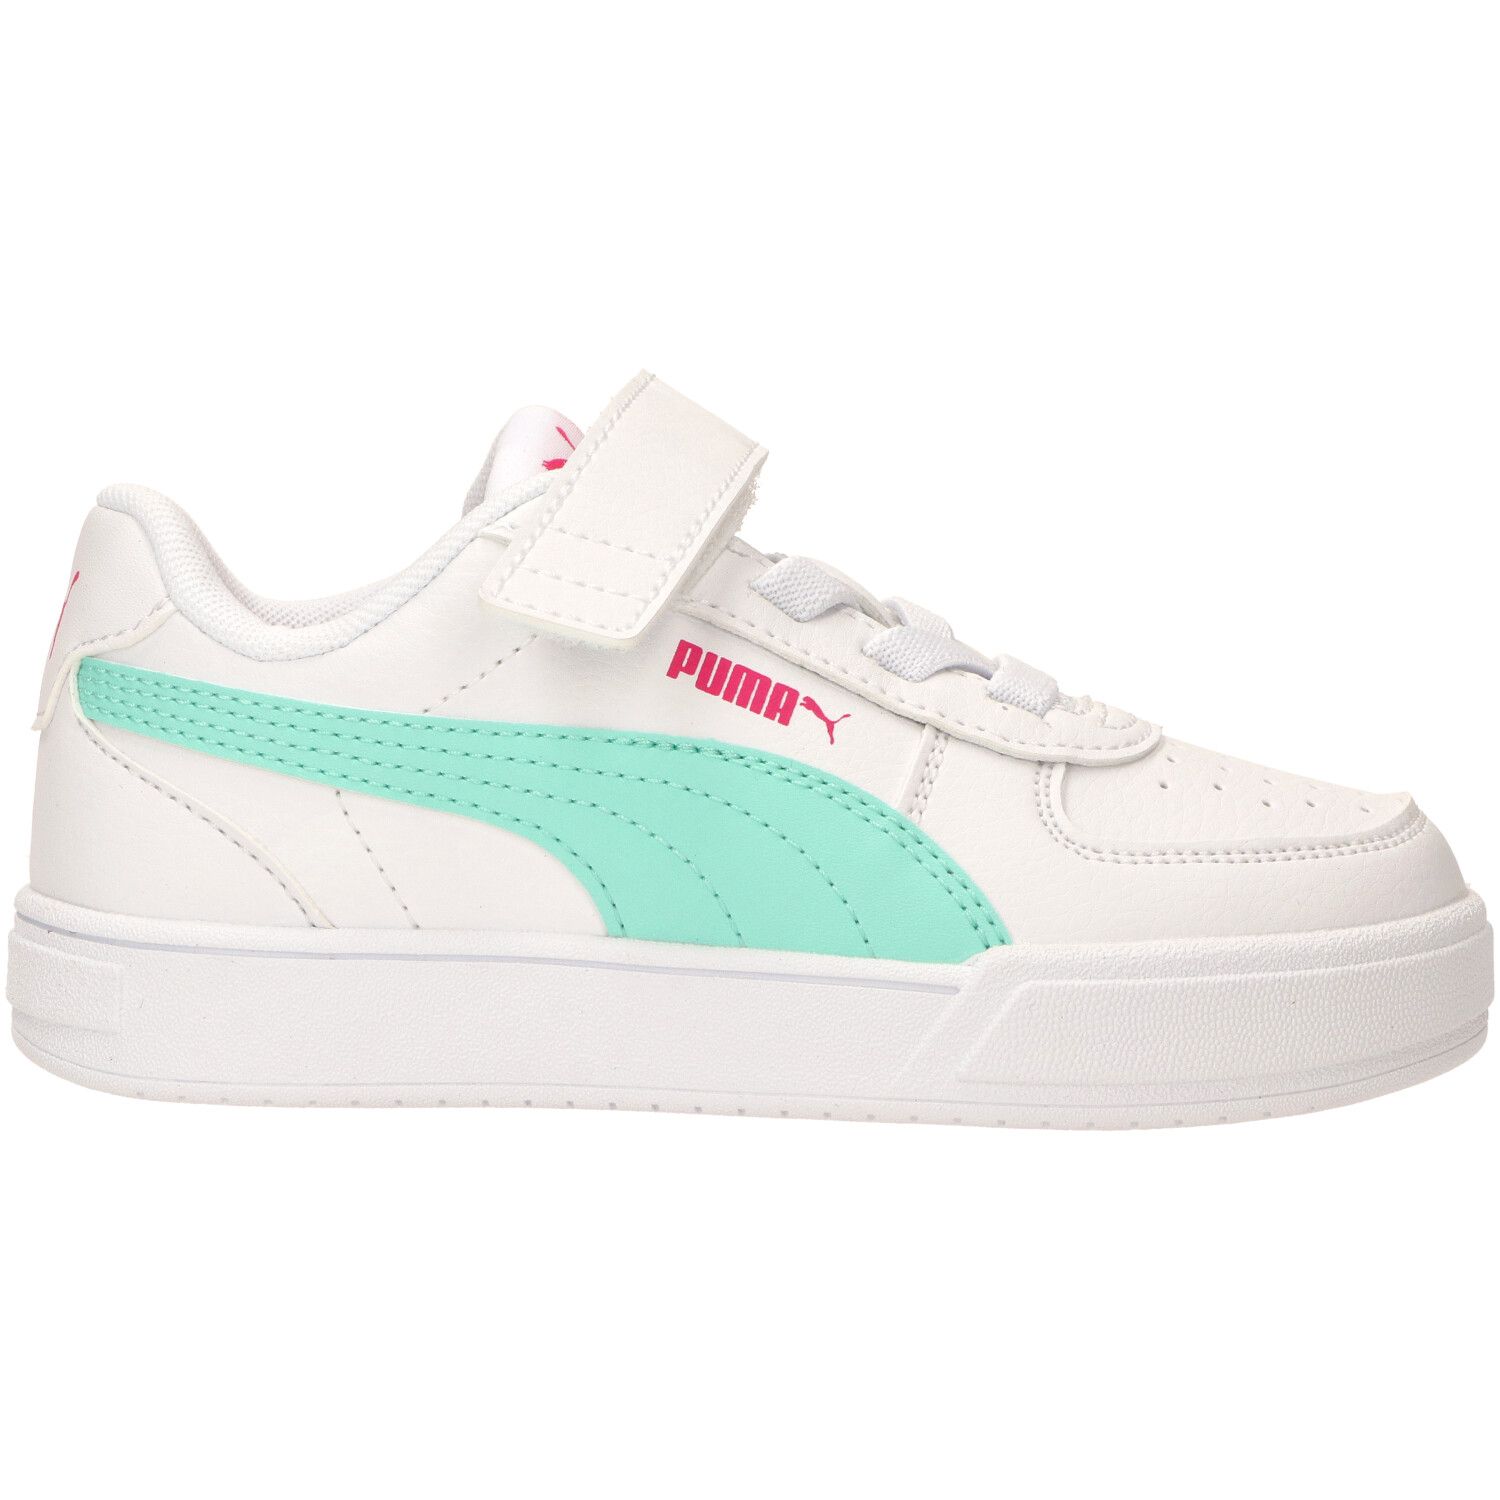 PUMA Caven AC+ PS Unisex Sneakers - White/Mint/GlowingPink - Maat 35